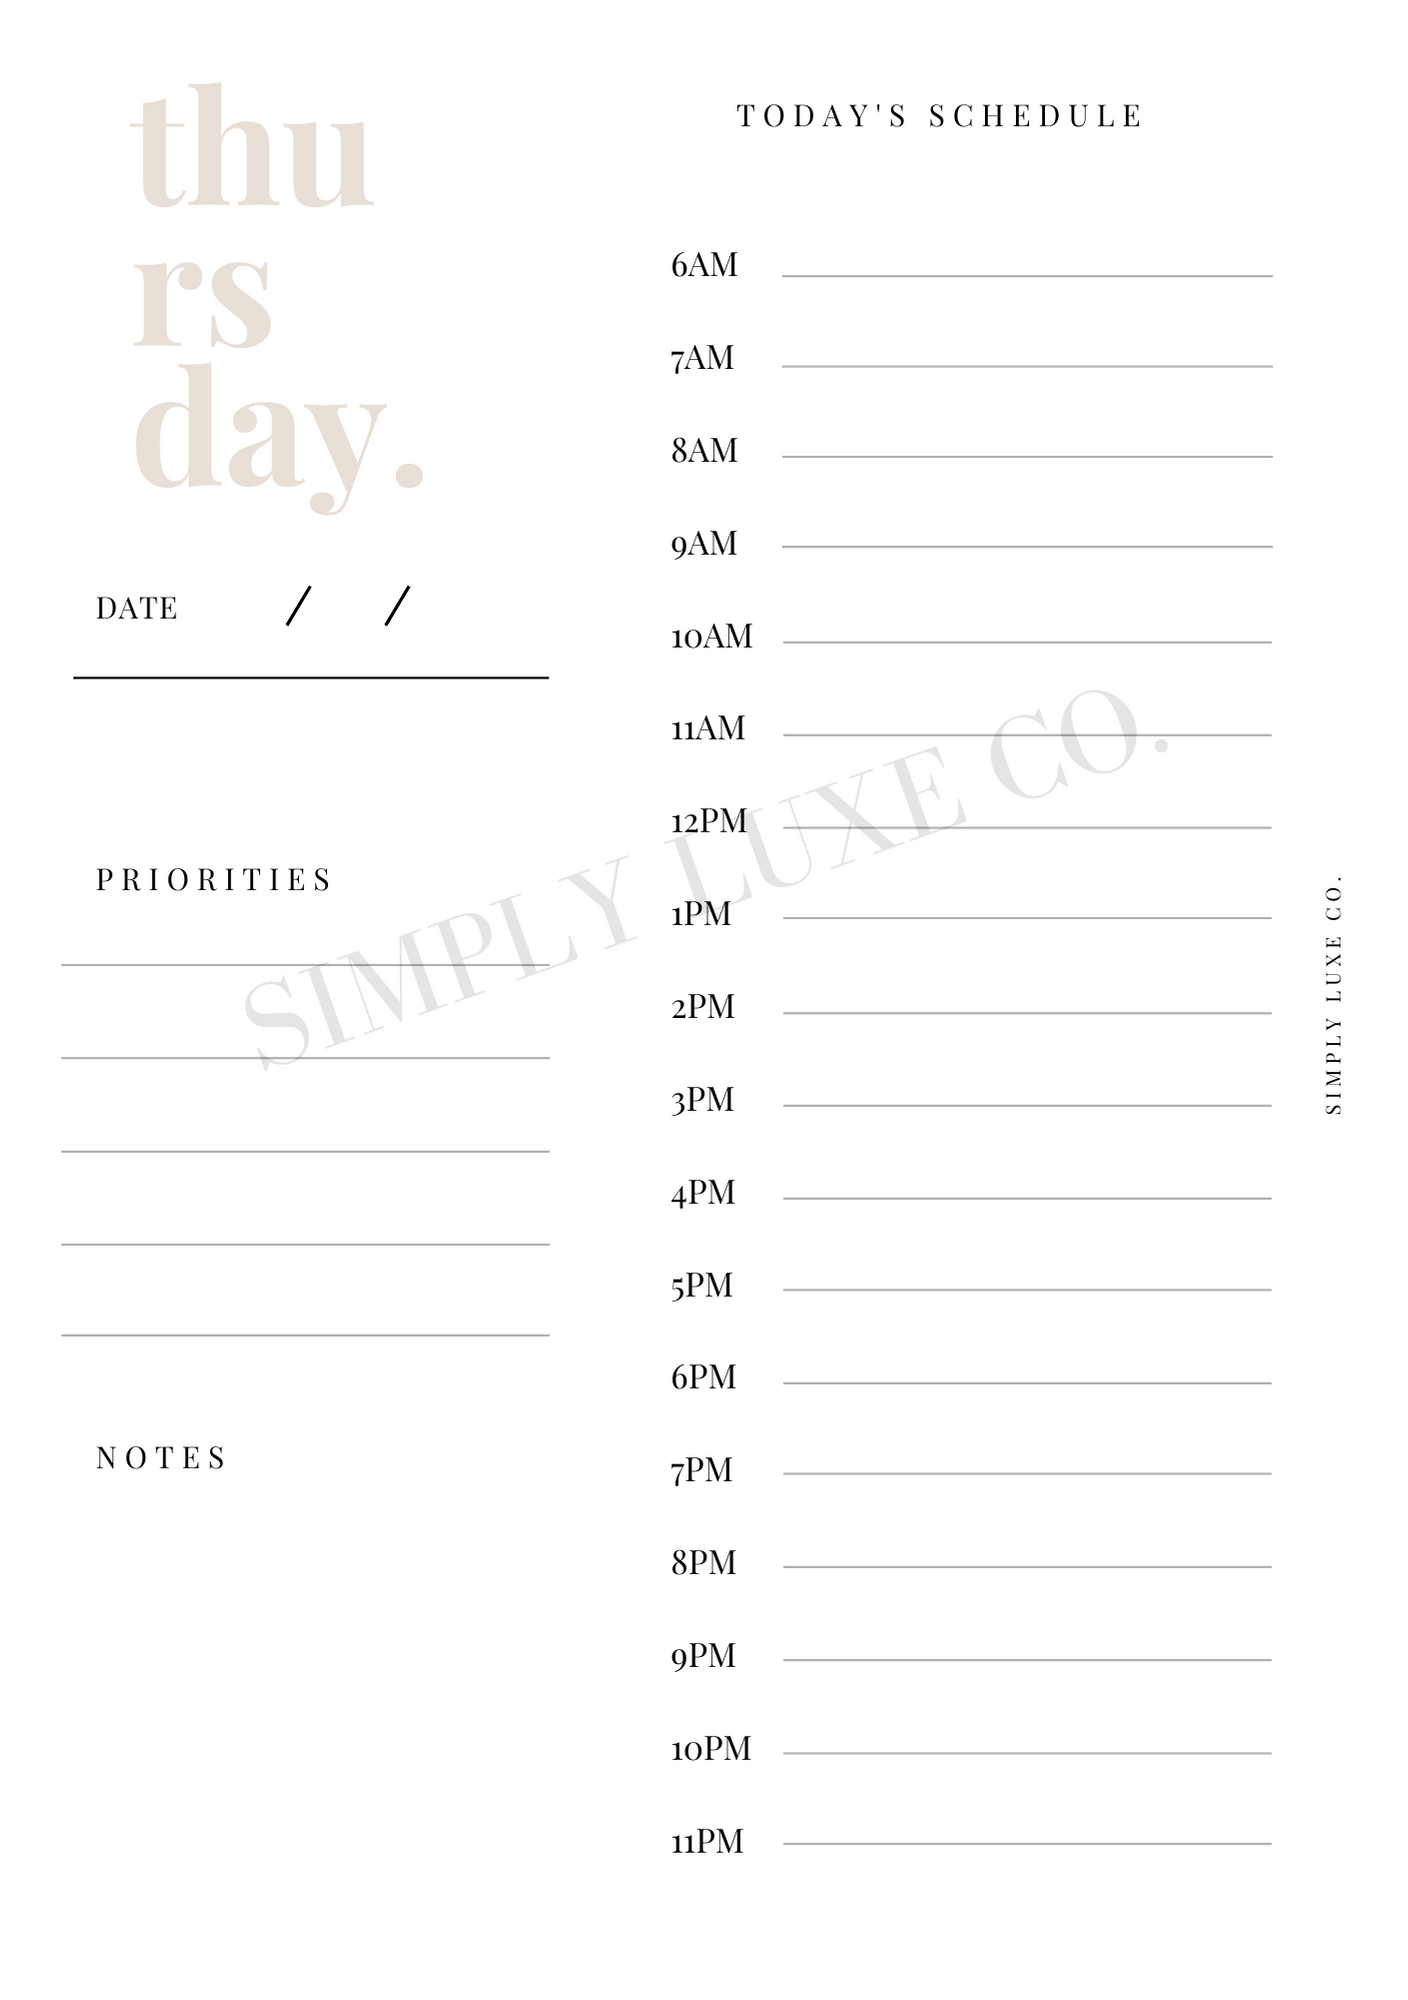 Undated Days Printable Insert Bundle - Monday thru Sunday w/ Weekly Overview - Available in 2 colors